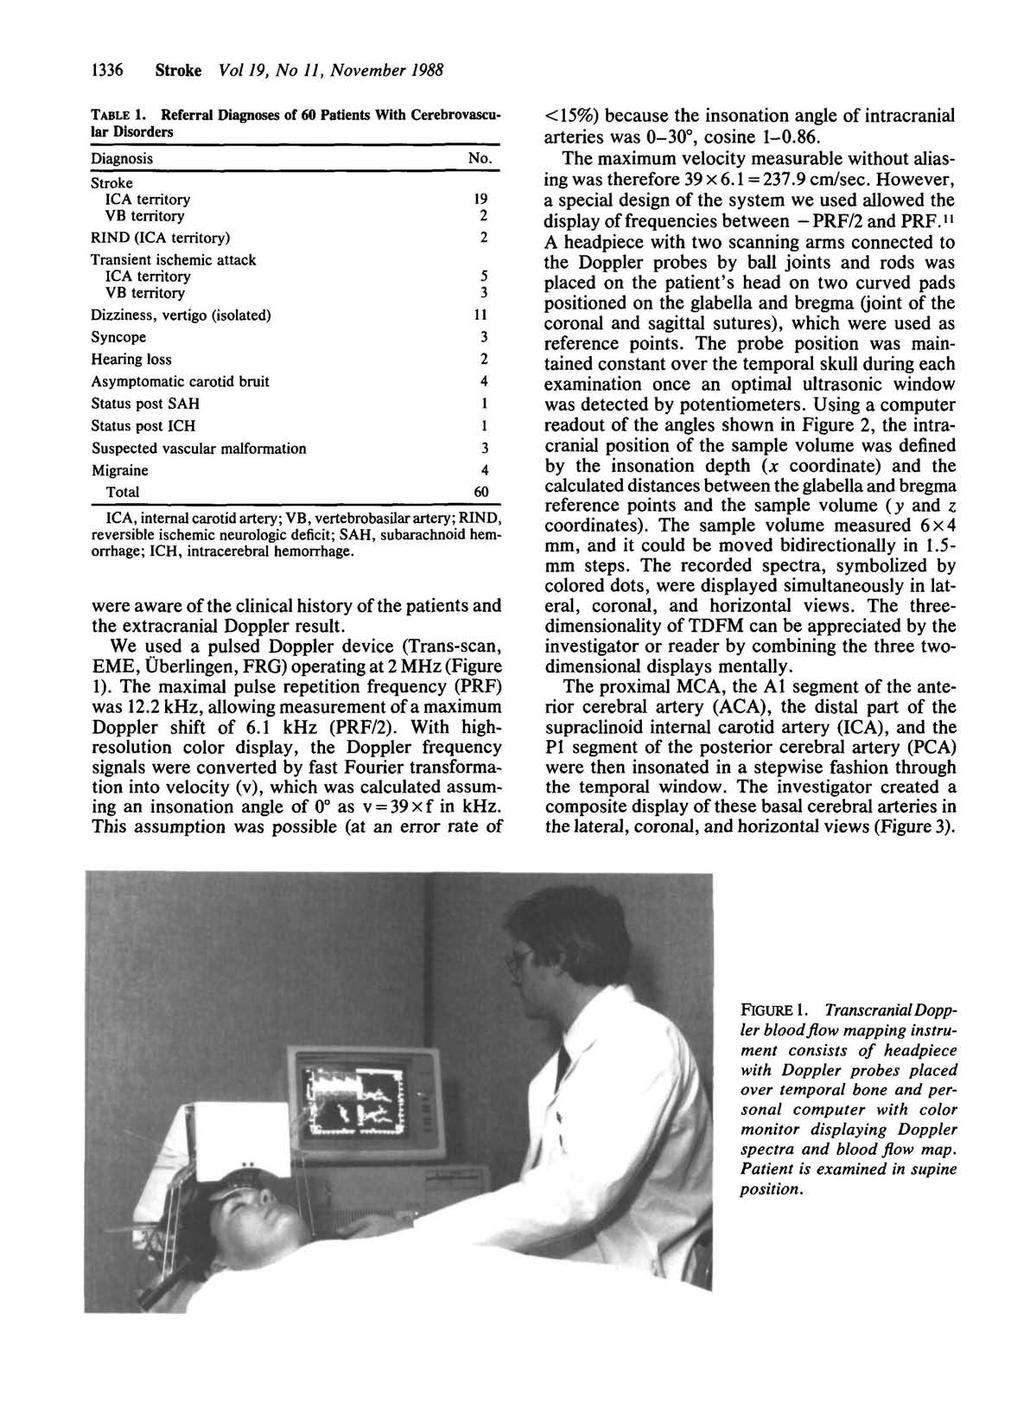 336 Stroke Vol 9, No, November 988 Downloaded from http://ahajournals.org by on October 8, 208 TABLE.